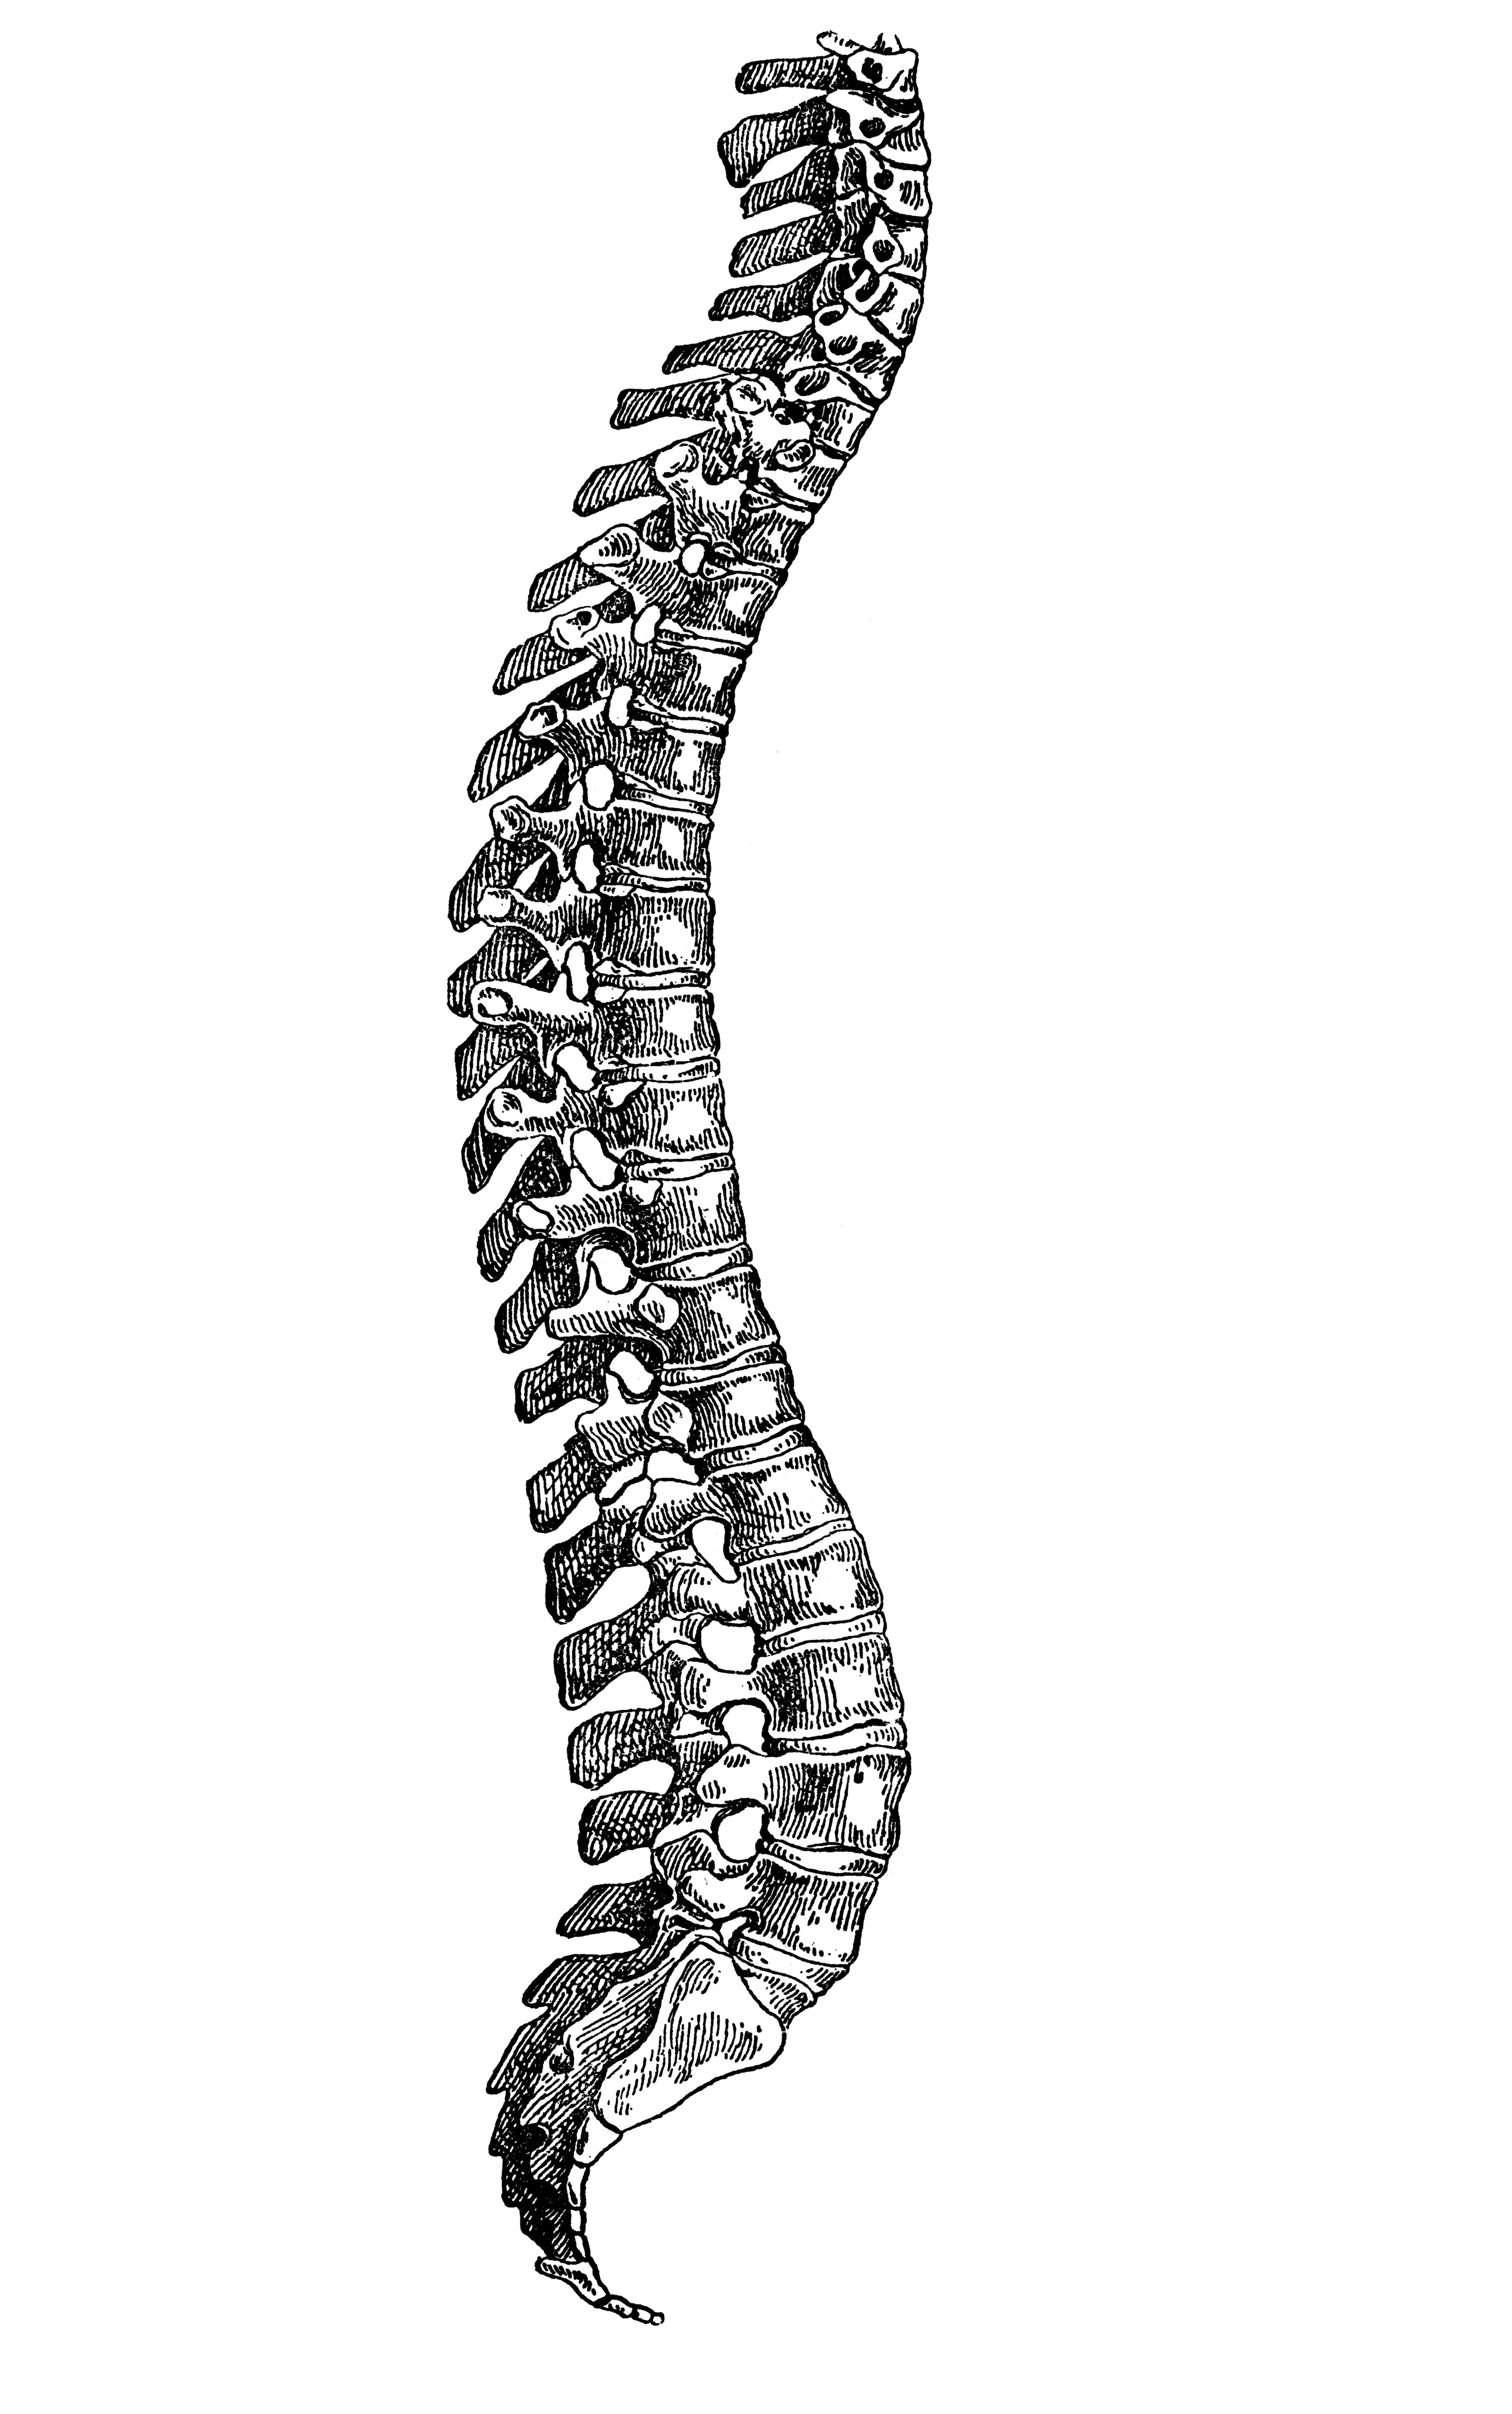 A drawing of a spine